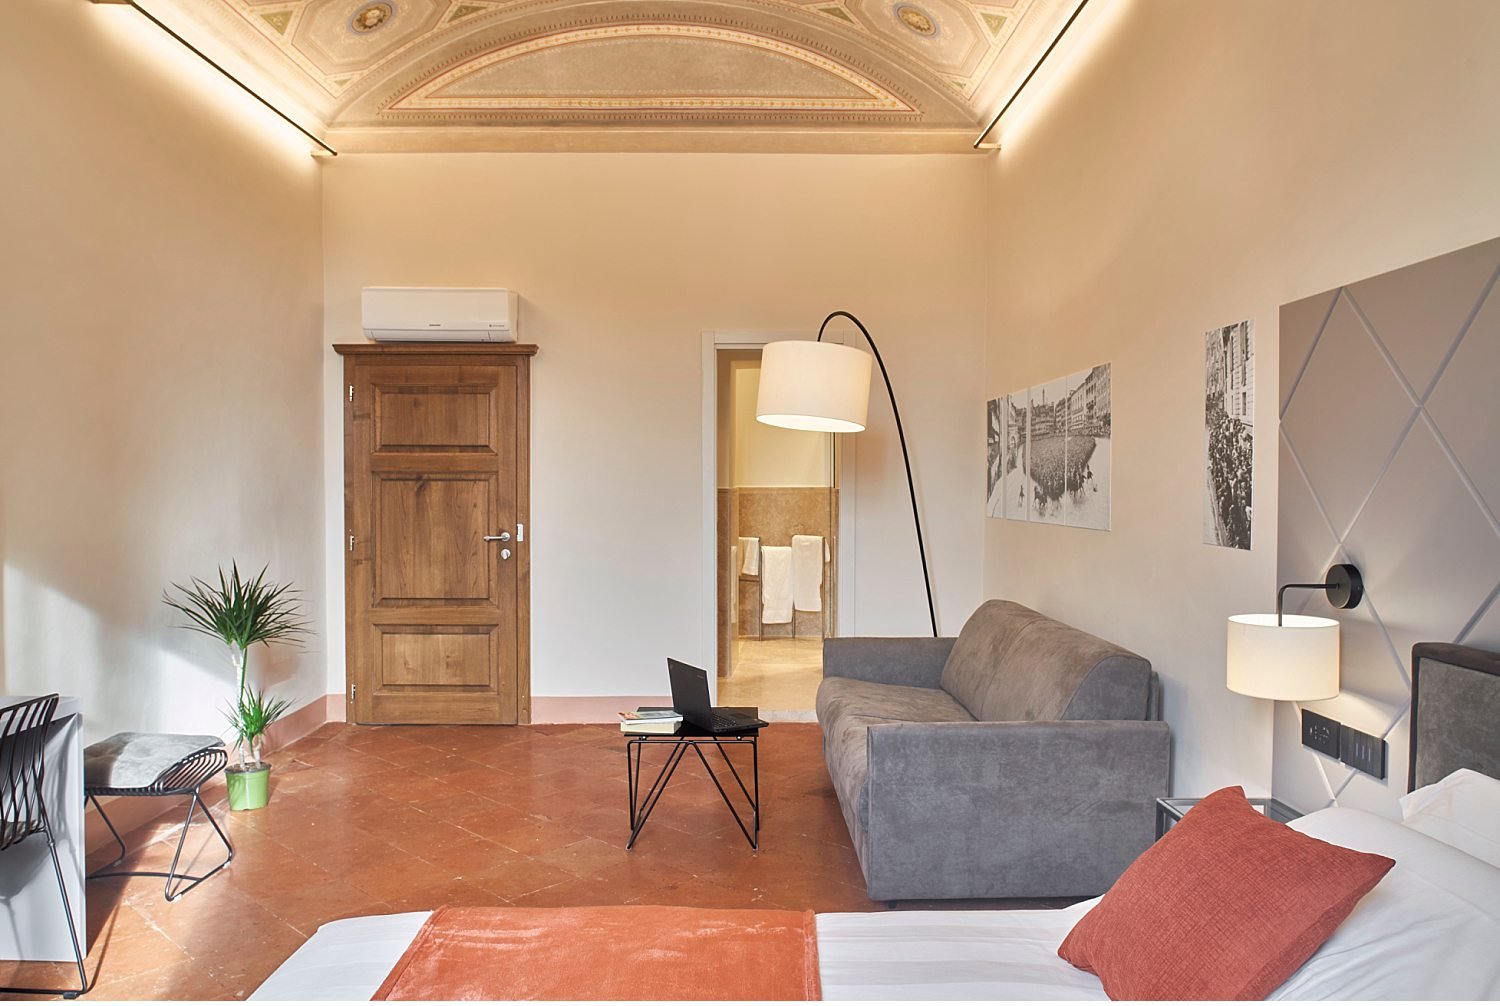  Prestigious apartments in the center of Siena, finely restored to welcome guests from all over the world and enjoy the city. La peoprietà real estate offers rooms with bathroom a stone's throw from Piazza del Campo and the Cathedral. The photo and v